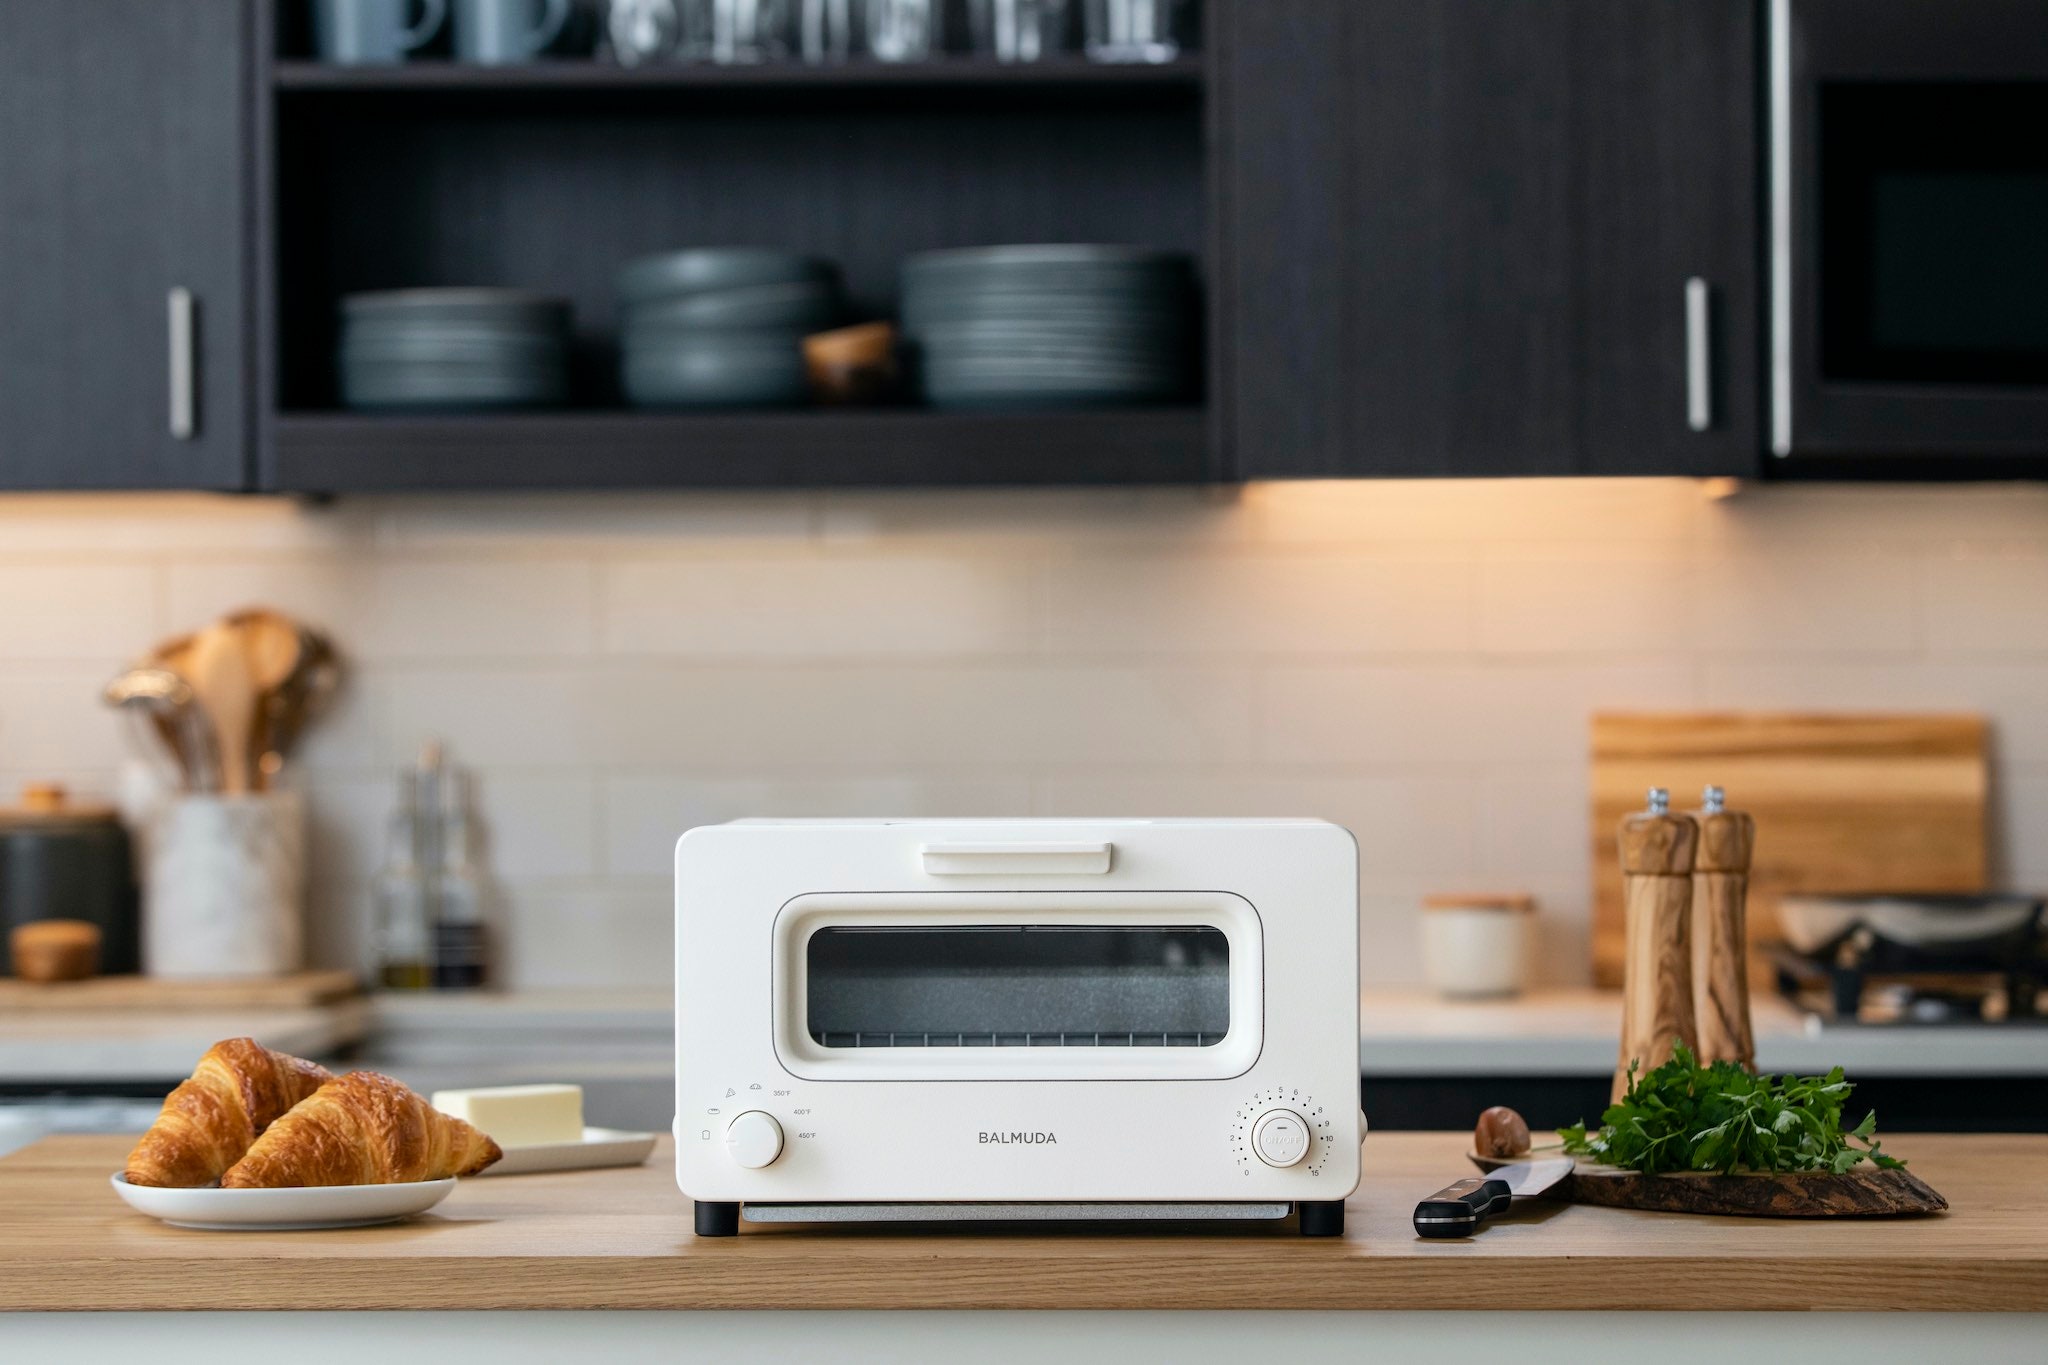 How Toasters Make Your Kitchen Complete